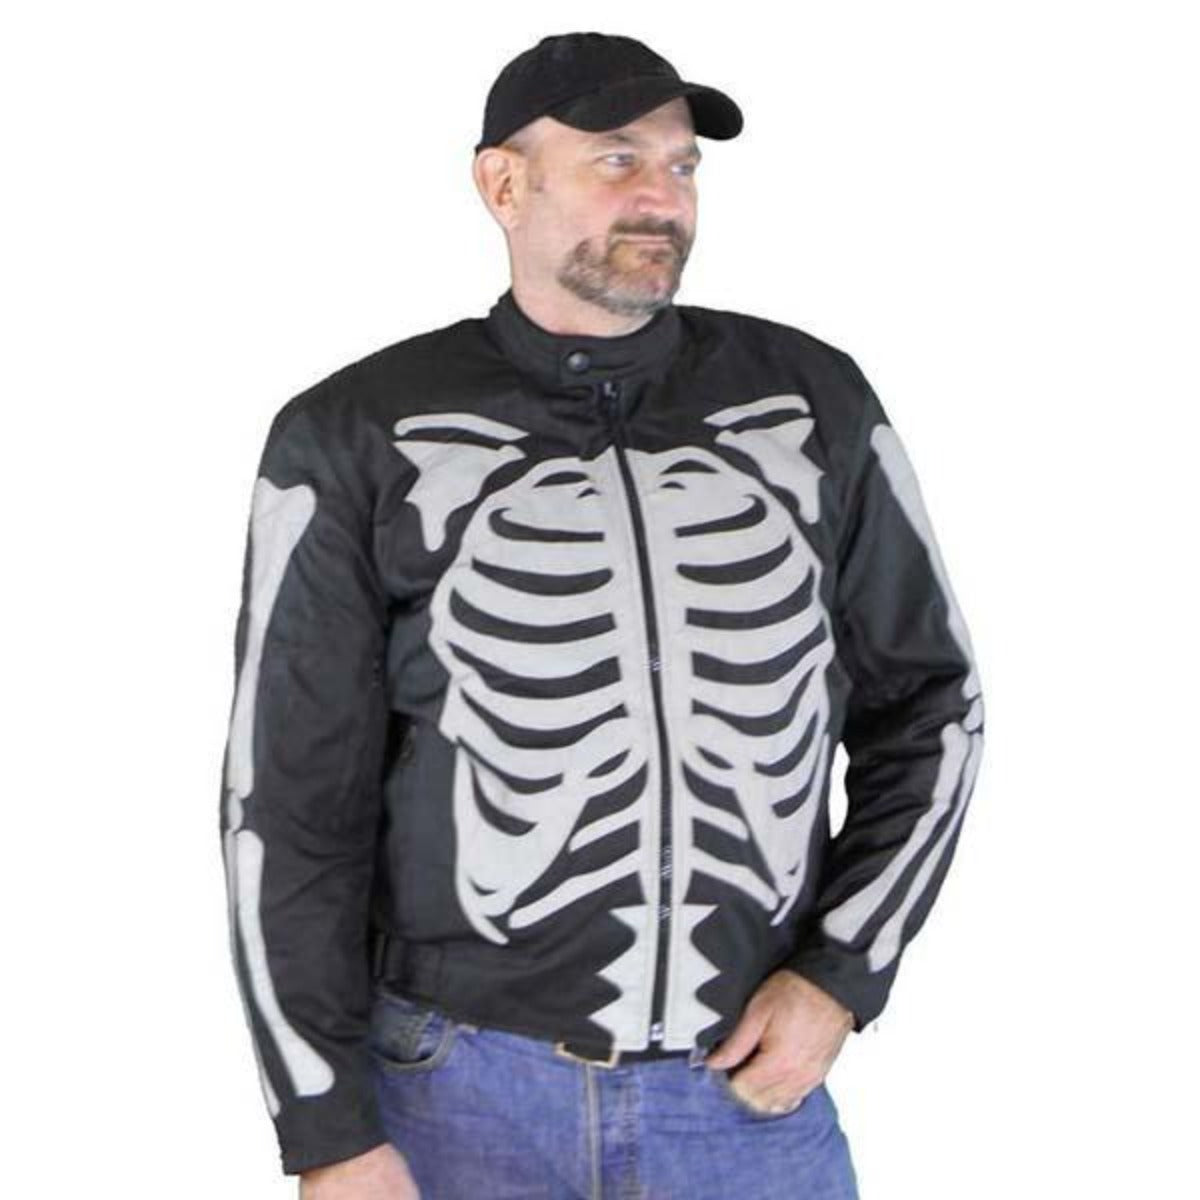 Vance Leather Men's Textile Jacket with Gray Reflective Skeleton and Armor